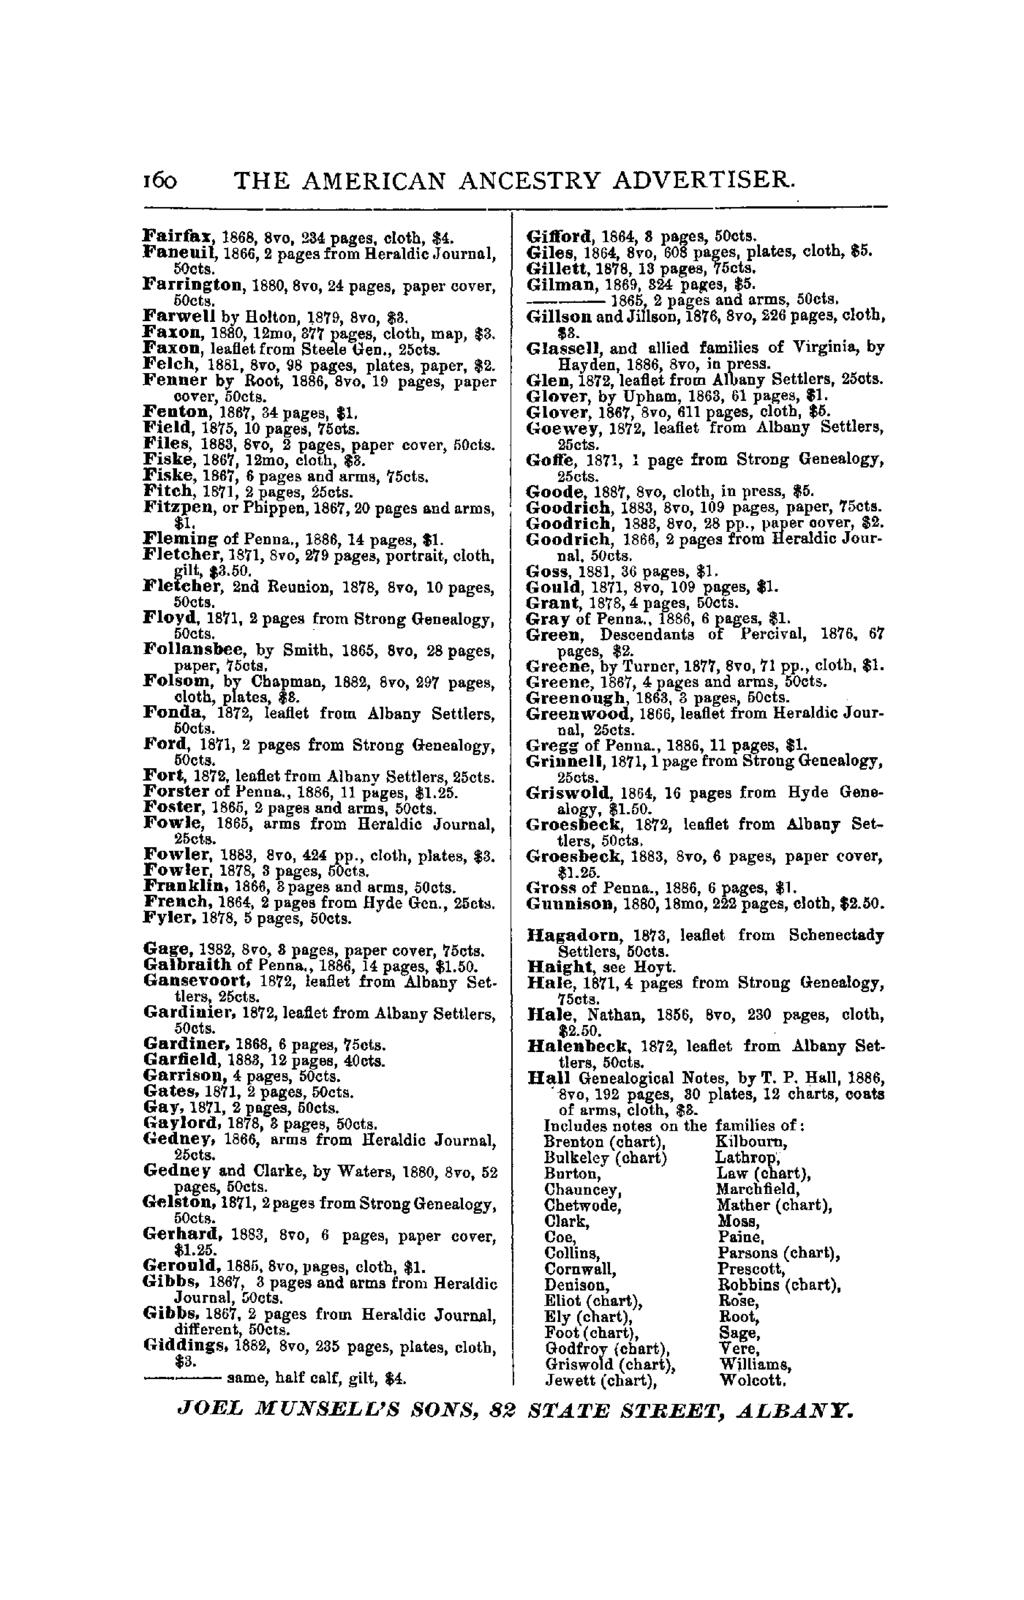 160 THE AMERICAN ANCESTRY ADVERTISER. Fairfax, 1868, 8vo, 234 pages, cloth, $4. Fanenil, 1866, 2 pages from Heraldic Journal, 5Octs. Farrington, 1880, 8vo, 24 pages, paper cover, 50cts.